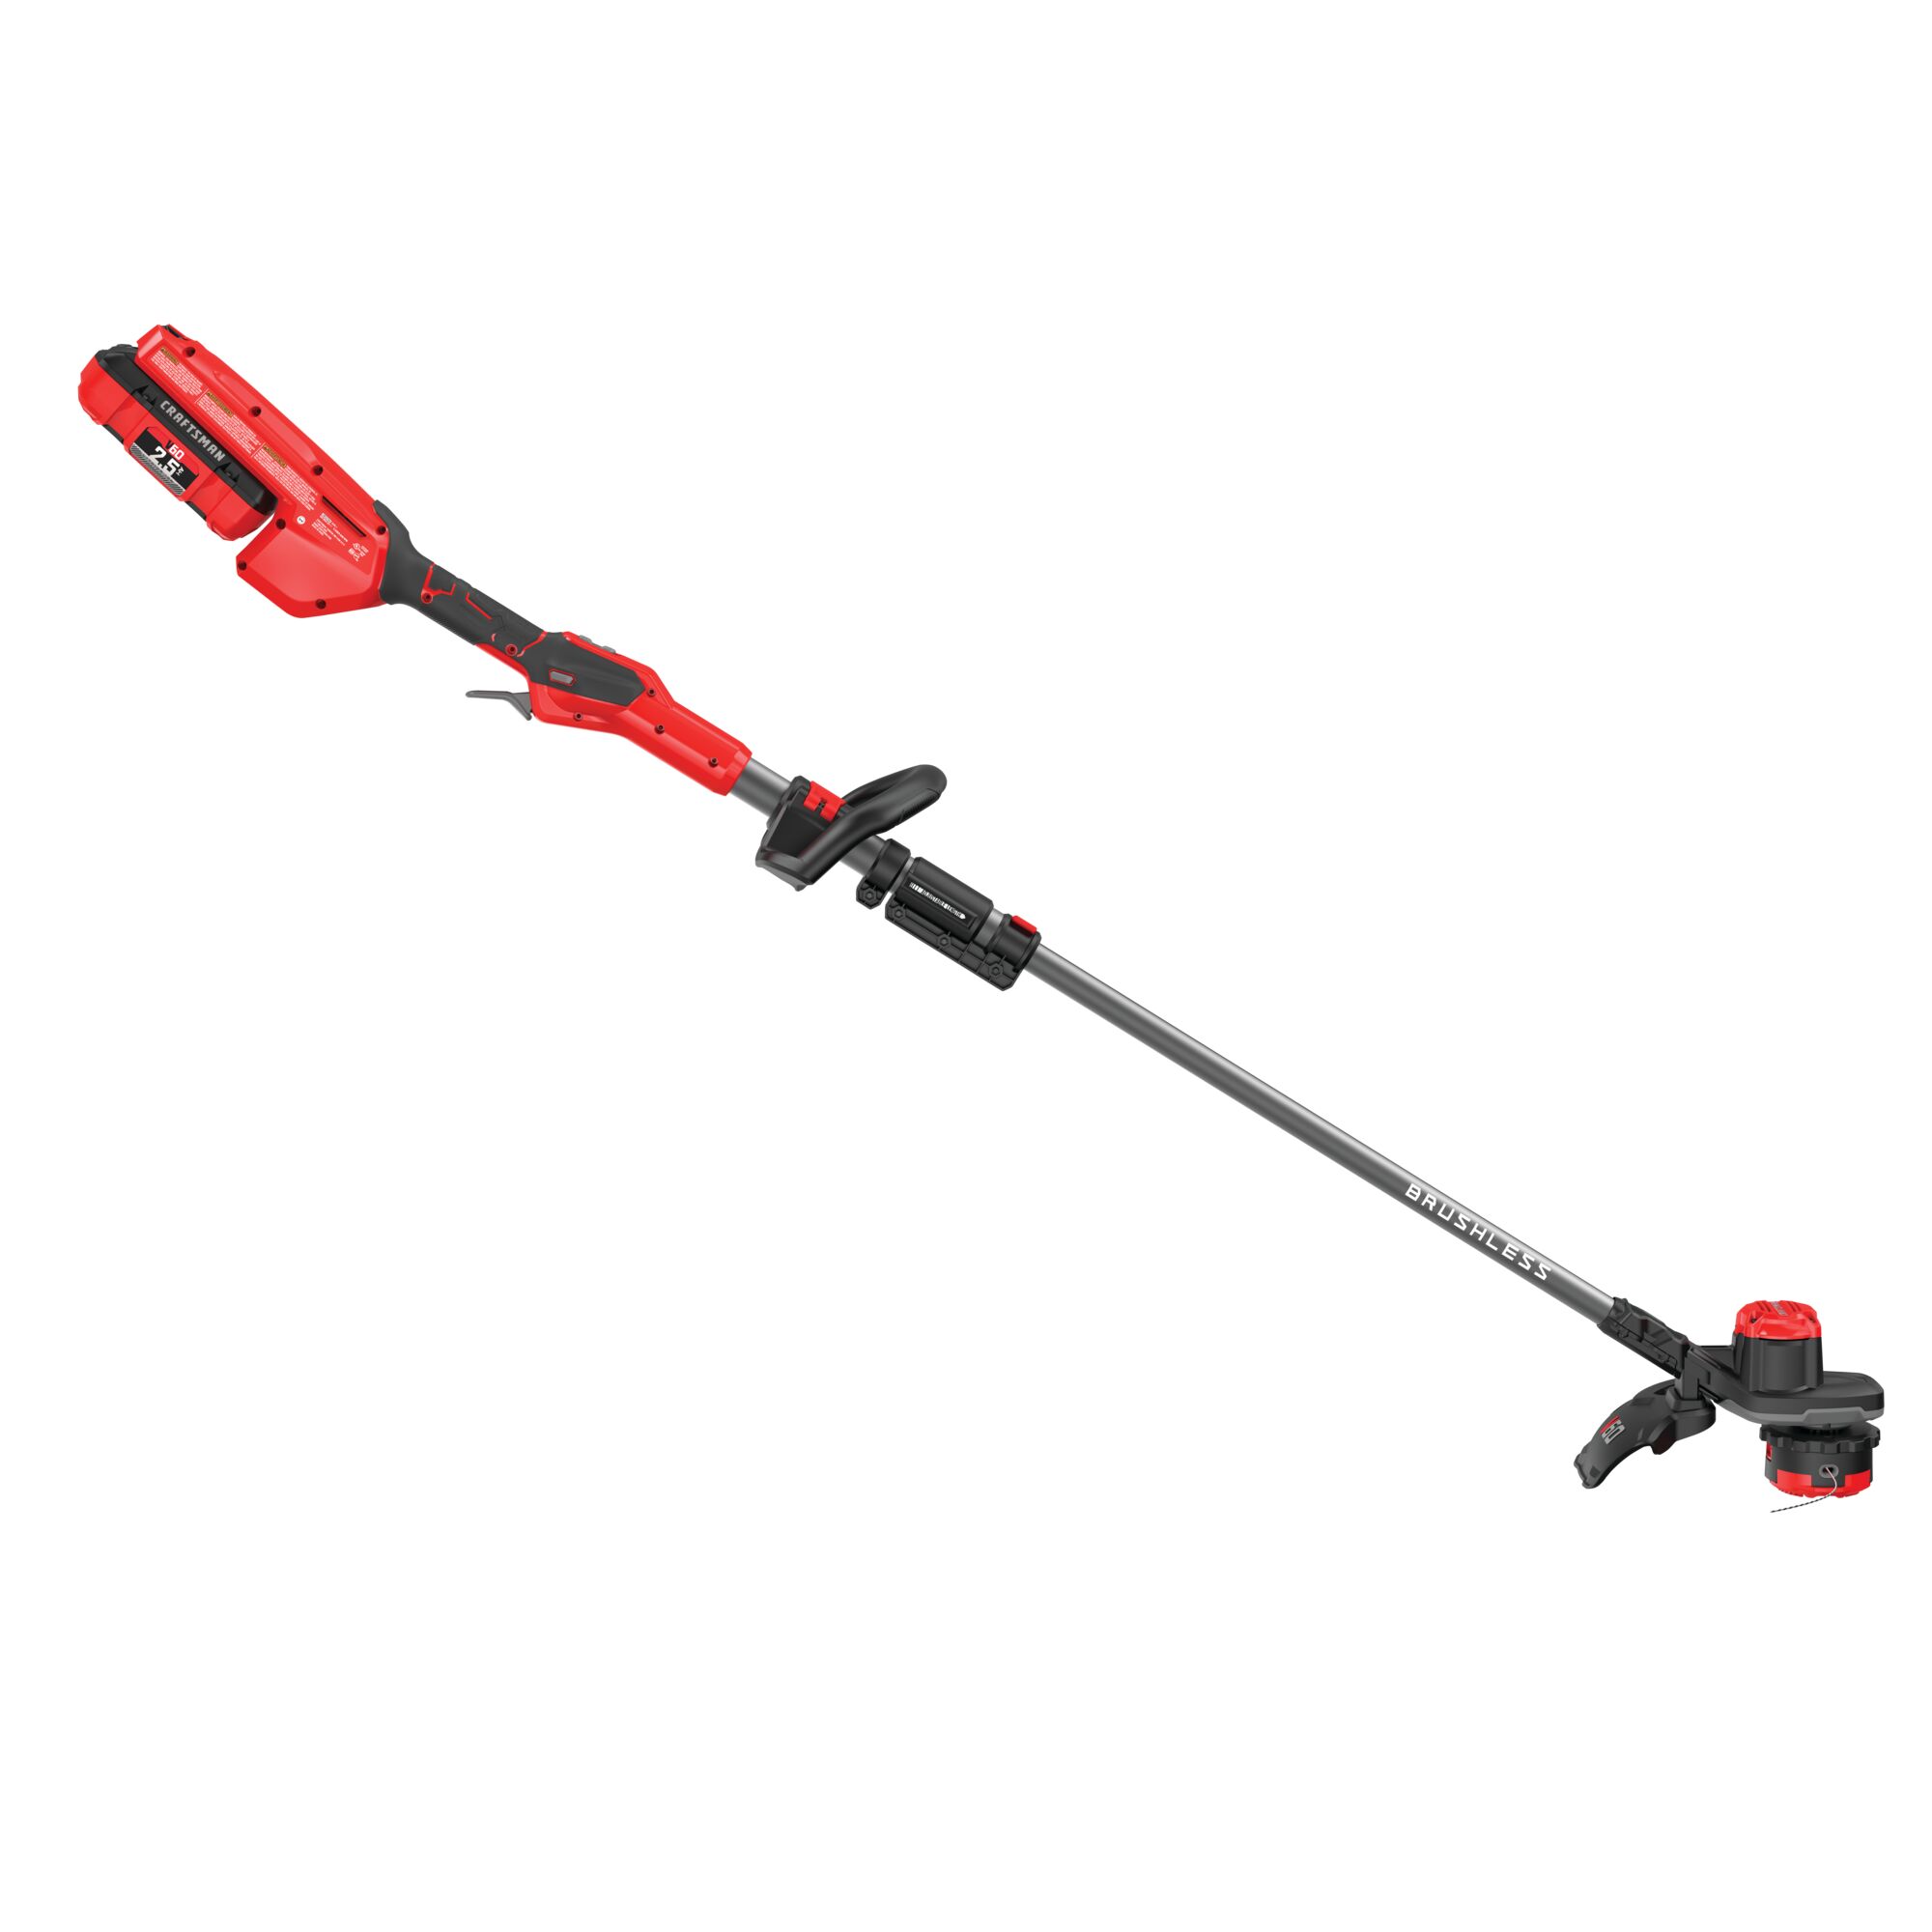 60 volt cordless 15 inch brushless weedwacker string trimmer with quickwind kit 2.5 ampere per hour.